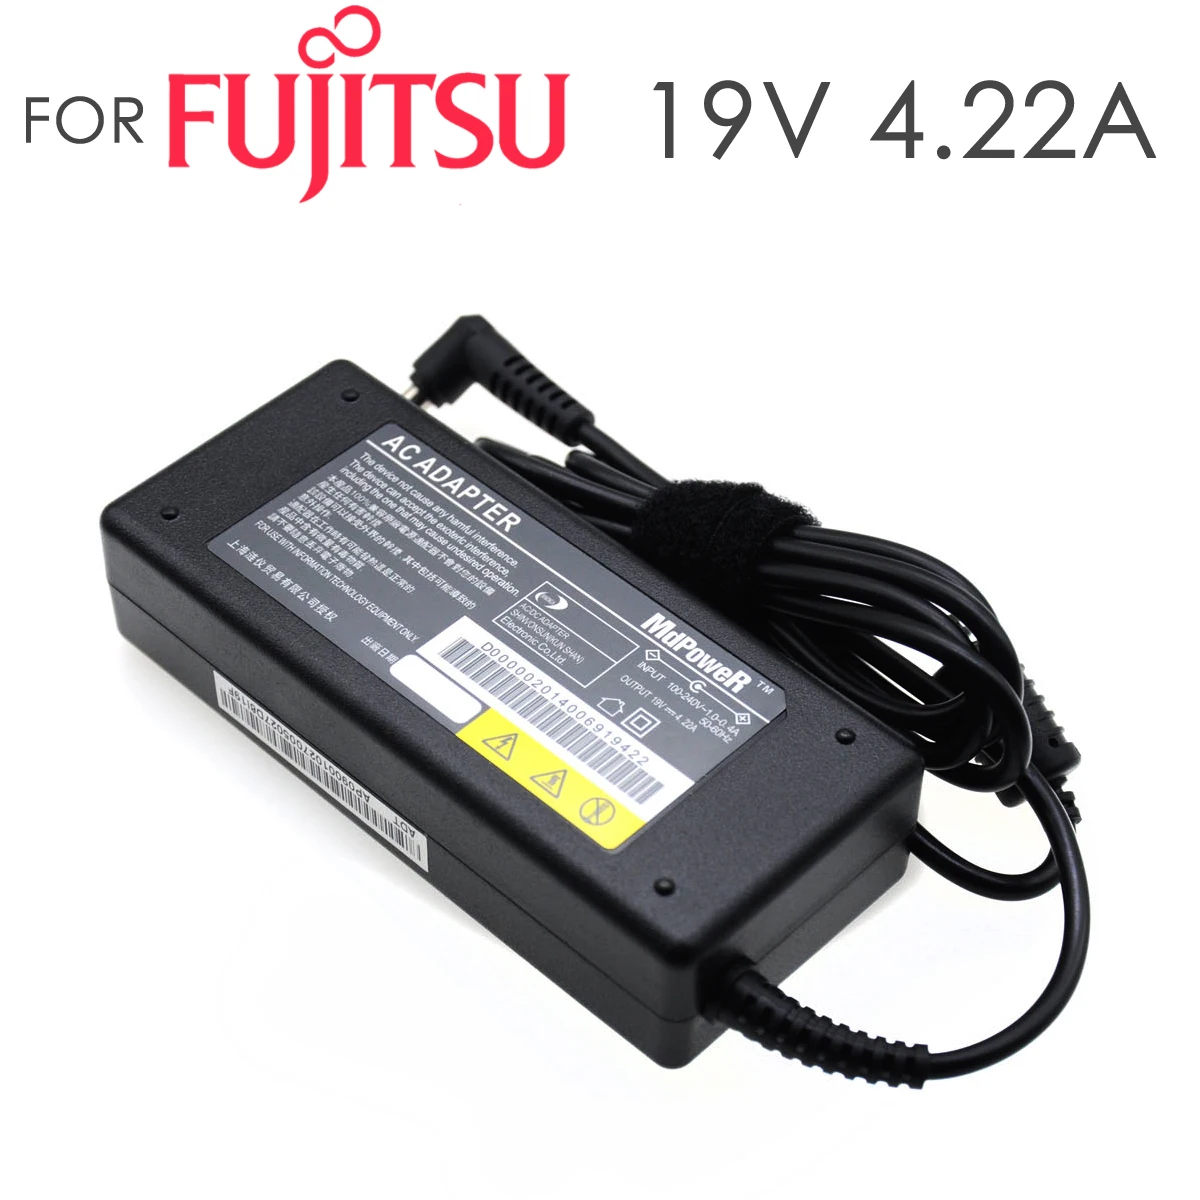 

For Fujitsu Siemens Amilo A1600 A1640 A1645 A1650 A1667 A1840 A2200+ A6600 laptop power supply AC adapter charger 19V 4.22A 80W